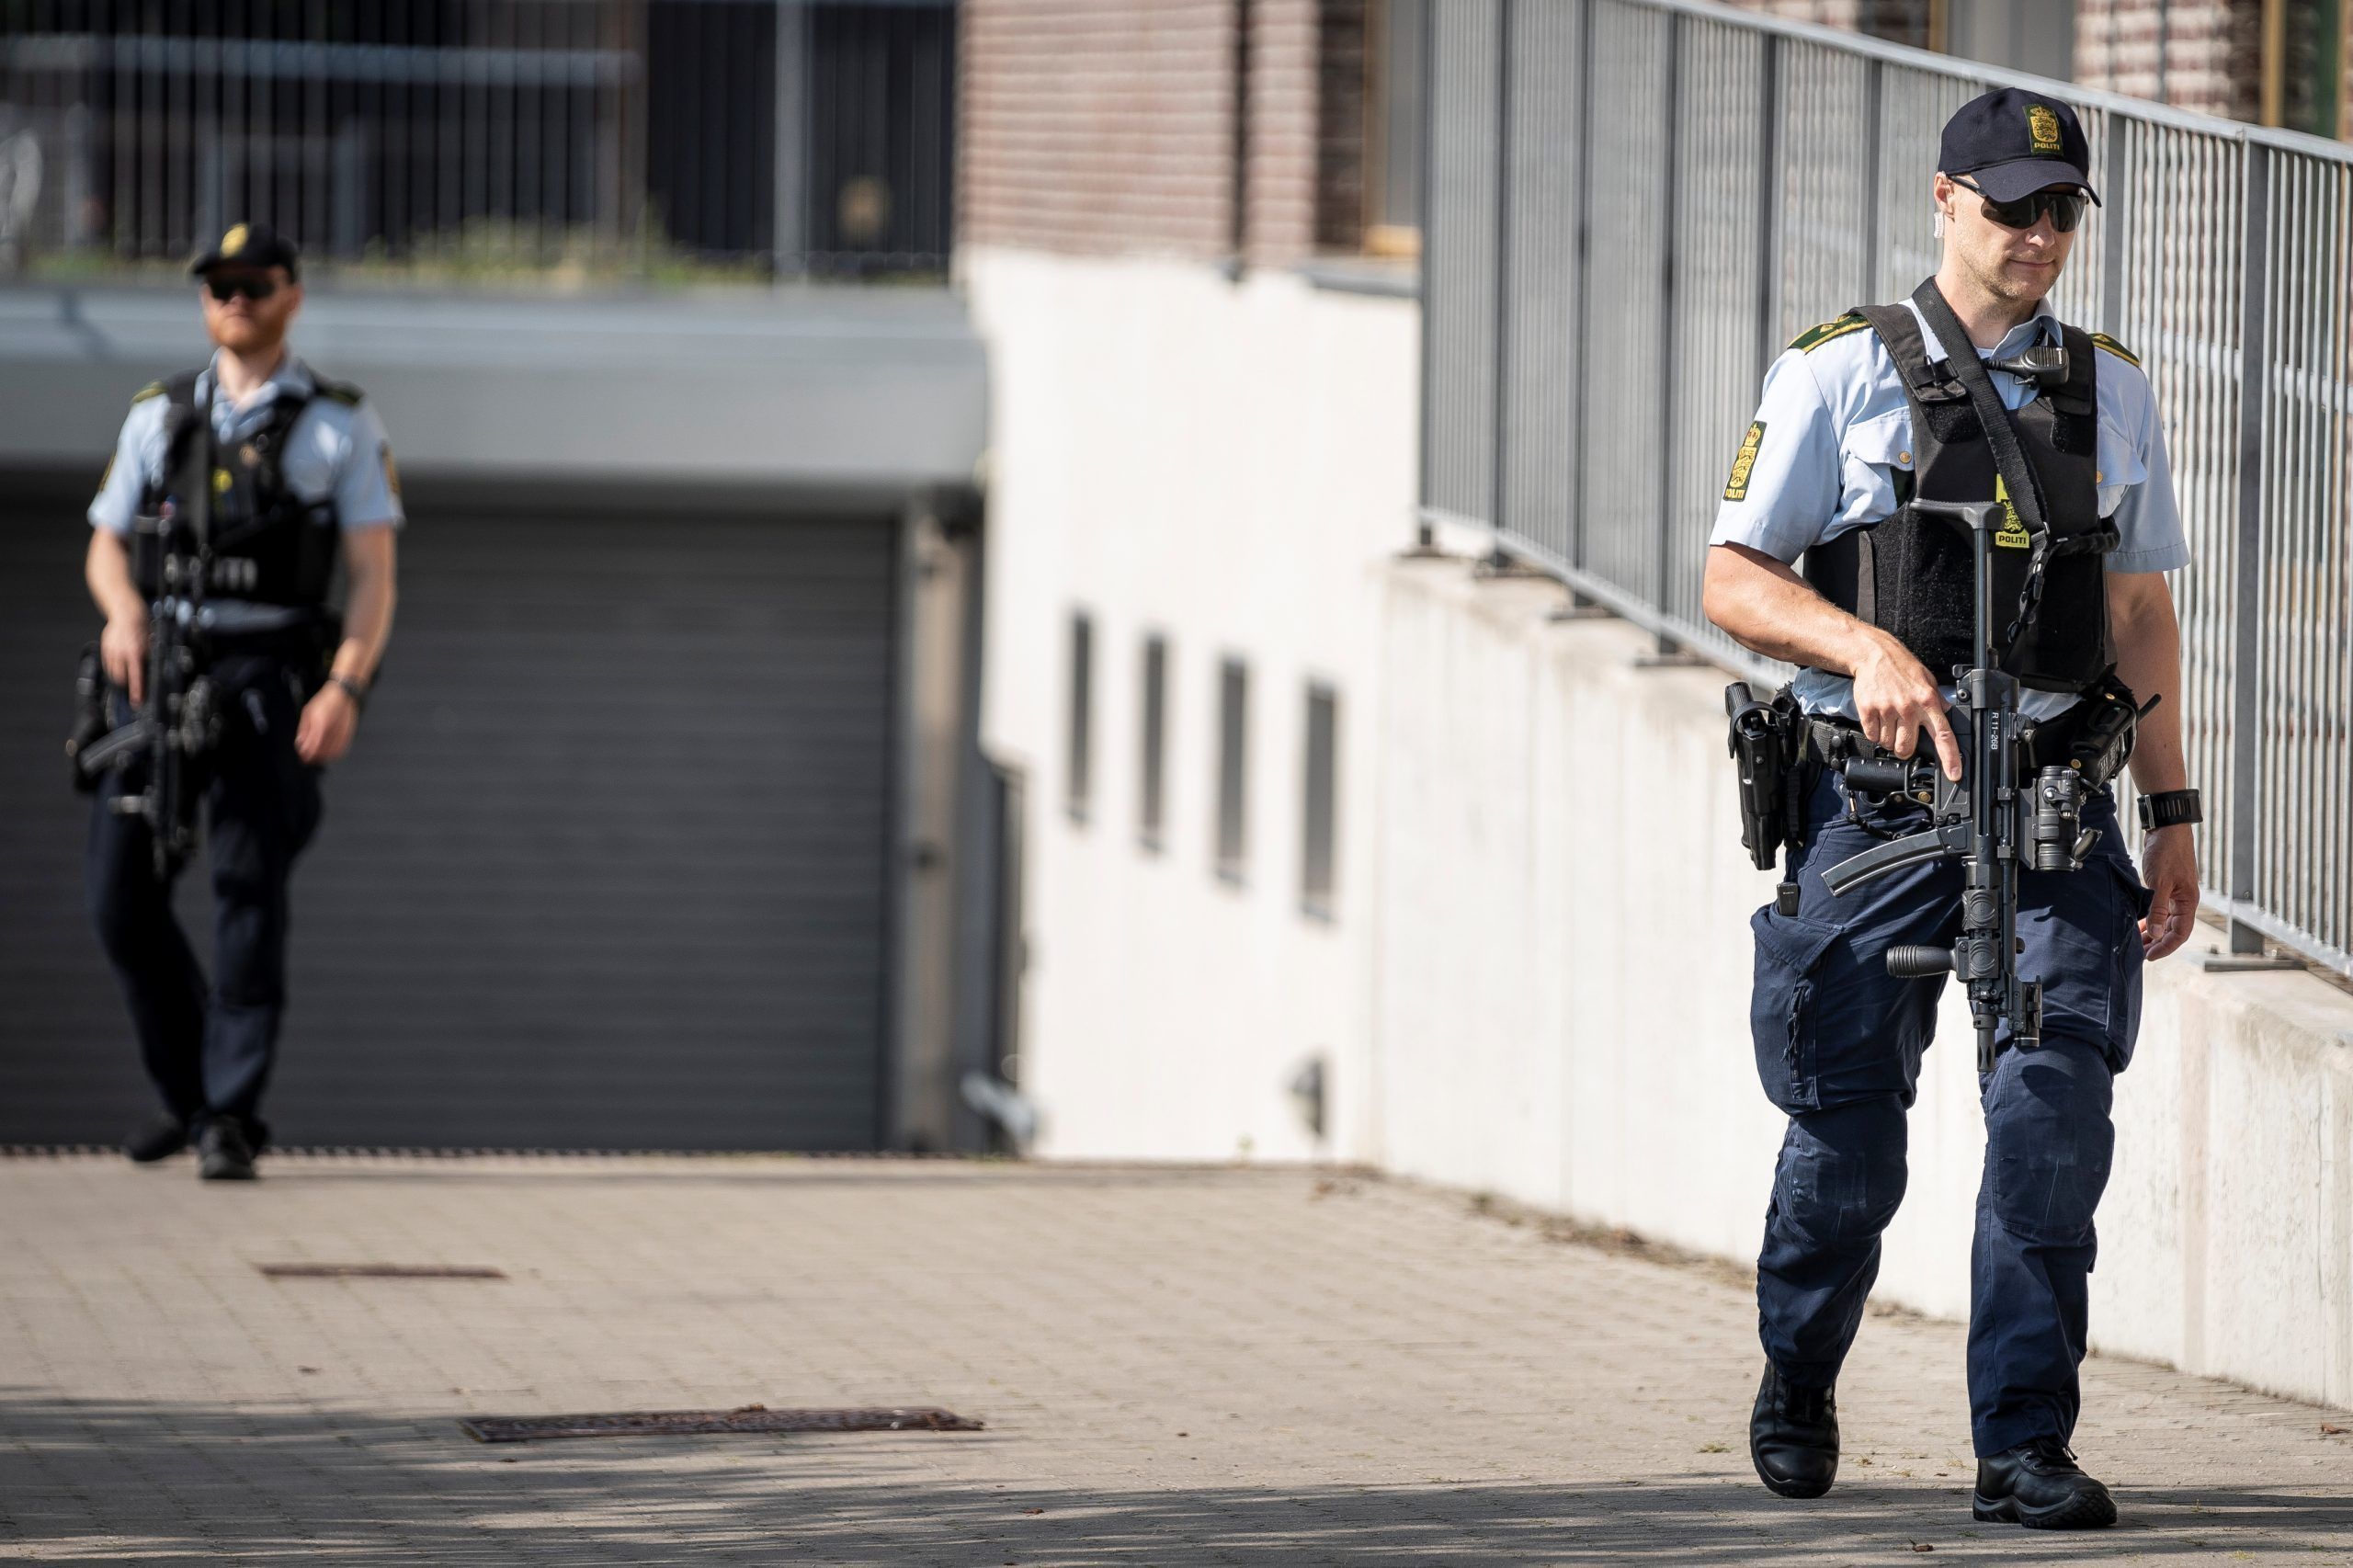 Danish police patrol outside the courthouse in Roskilde, Denmark June 26, 2020. REUTERS./